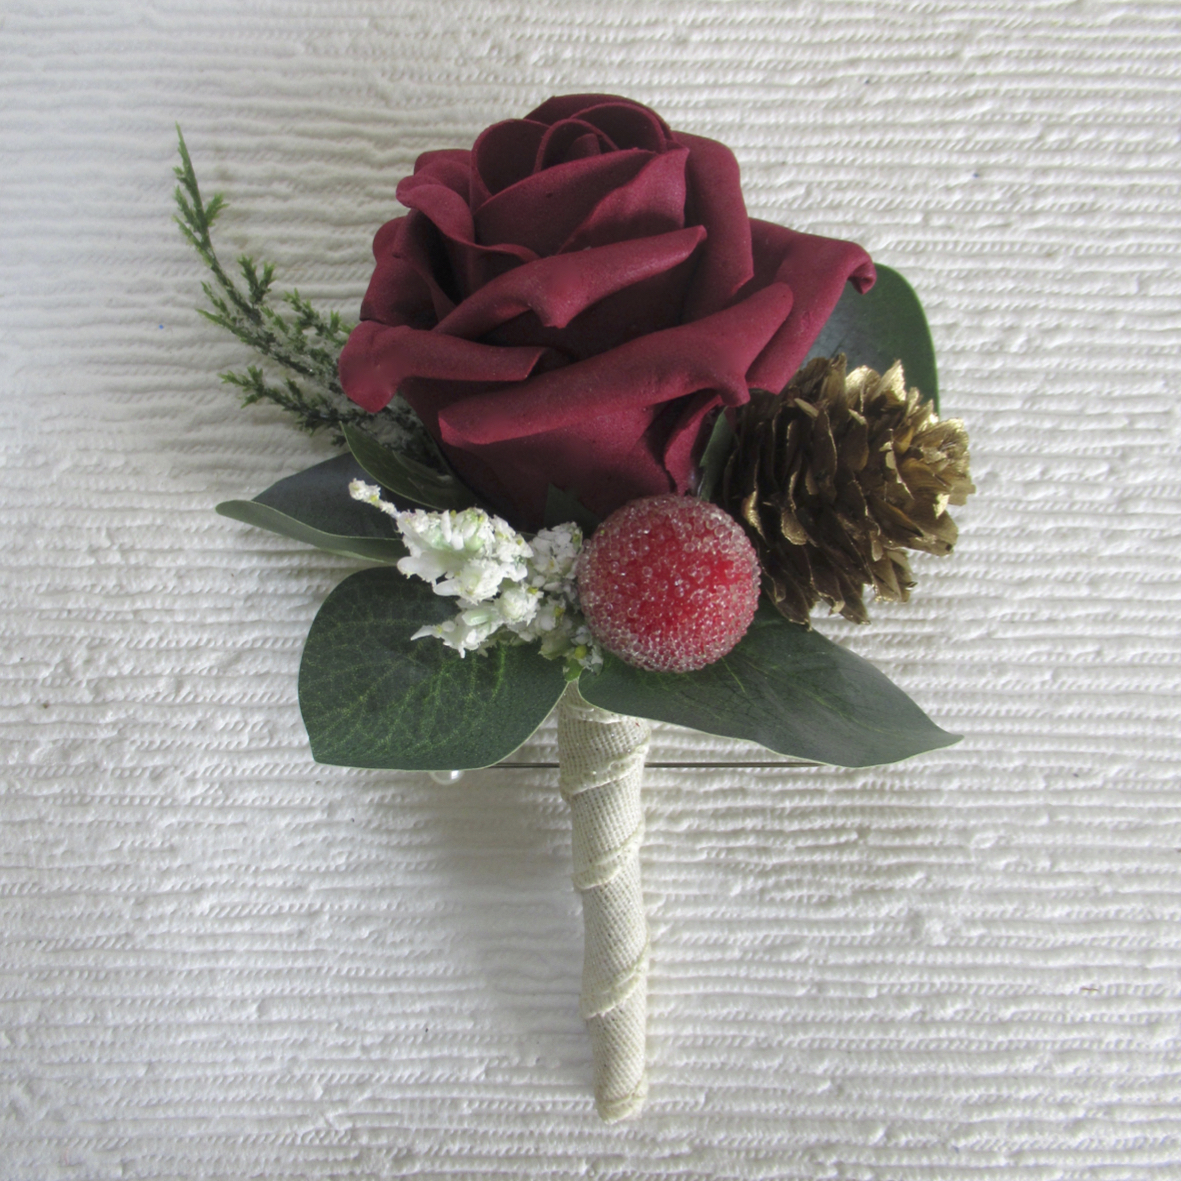 Burgundy rose uttonhole with pine cone, winter inspired buttonholes